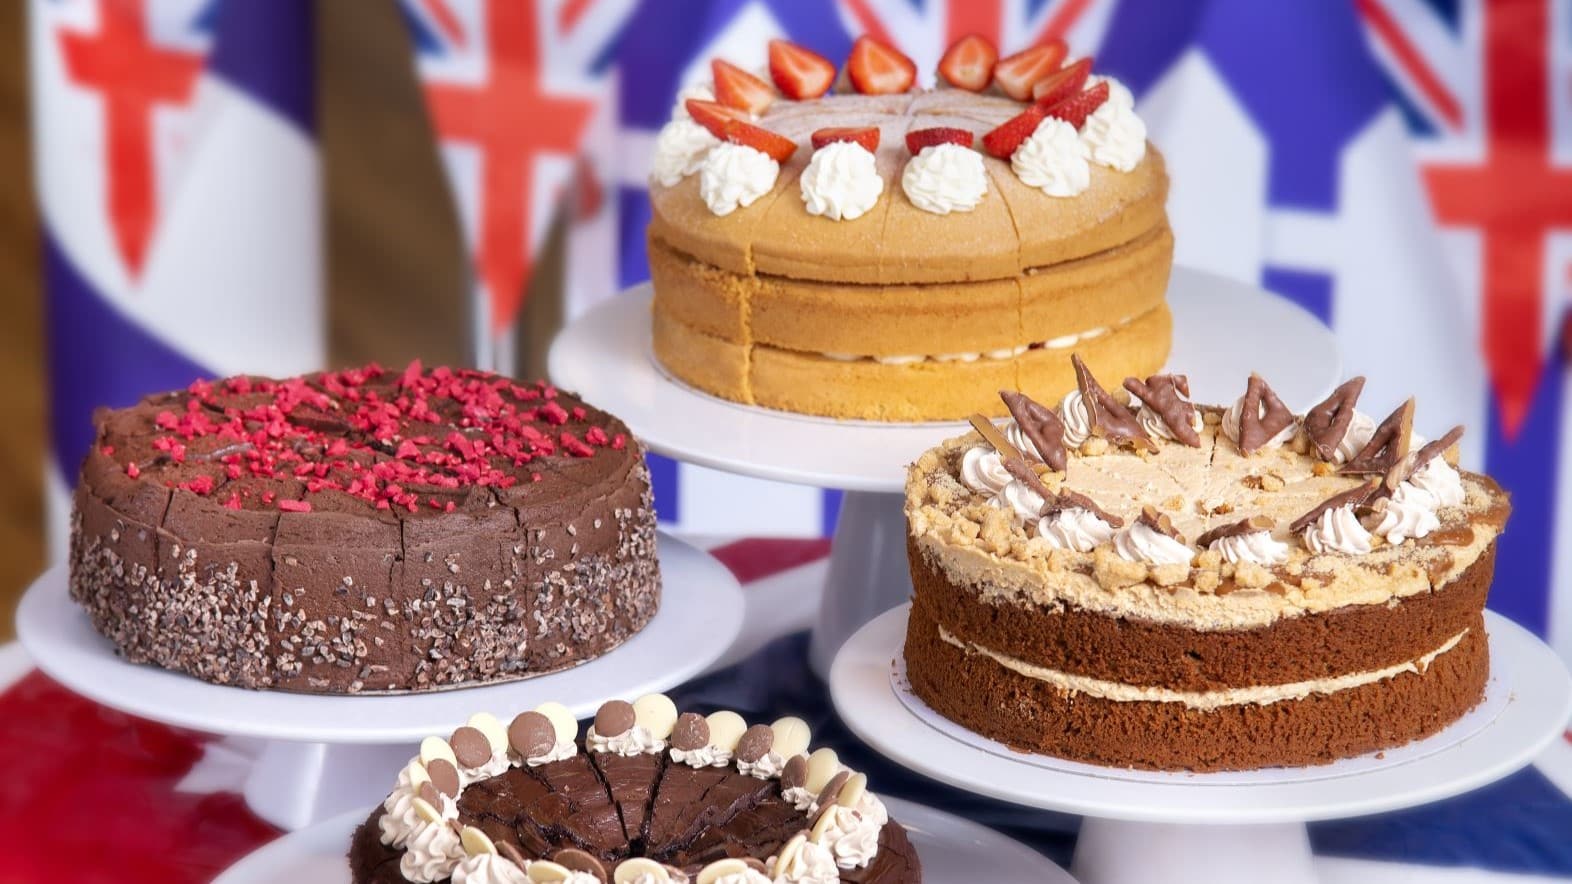 A series of cakes made by Cadbury World specifically for the King's Coronation Weekend in Bimirngham